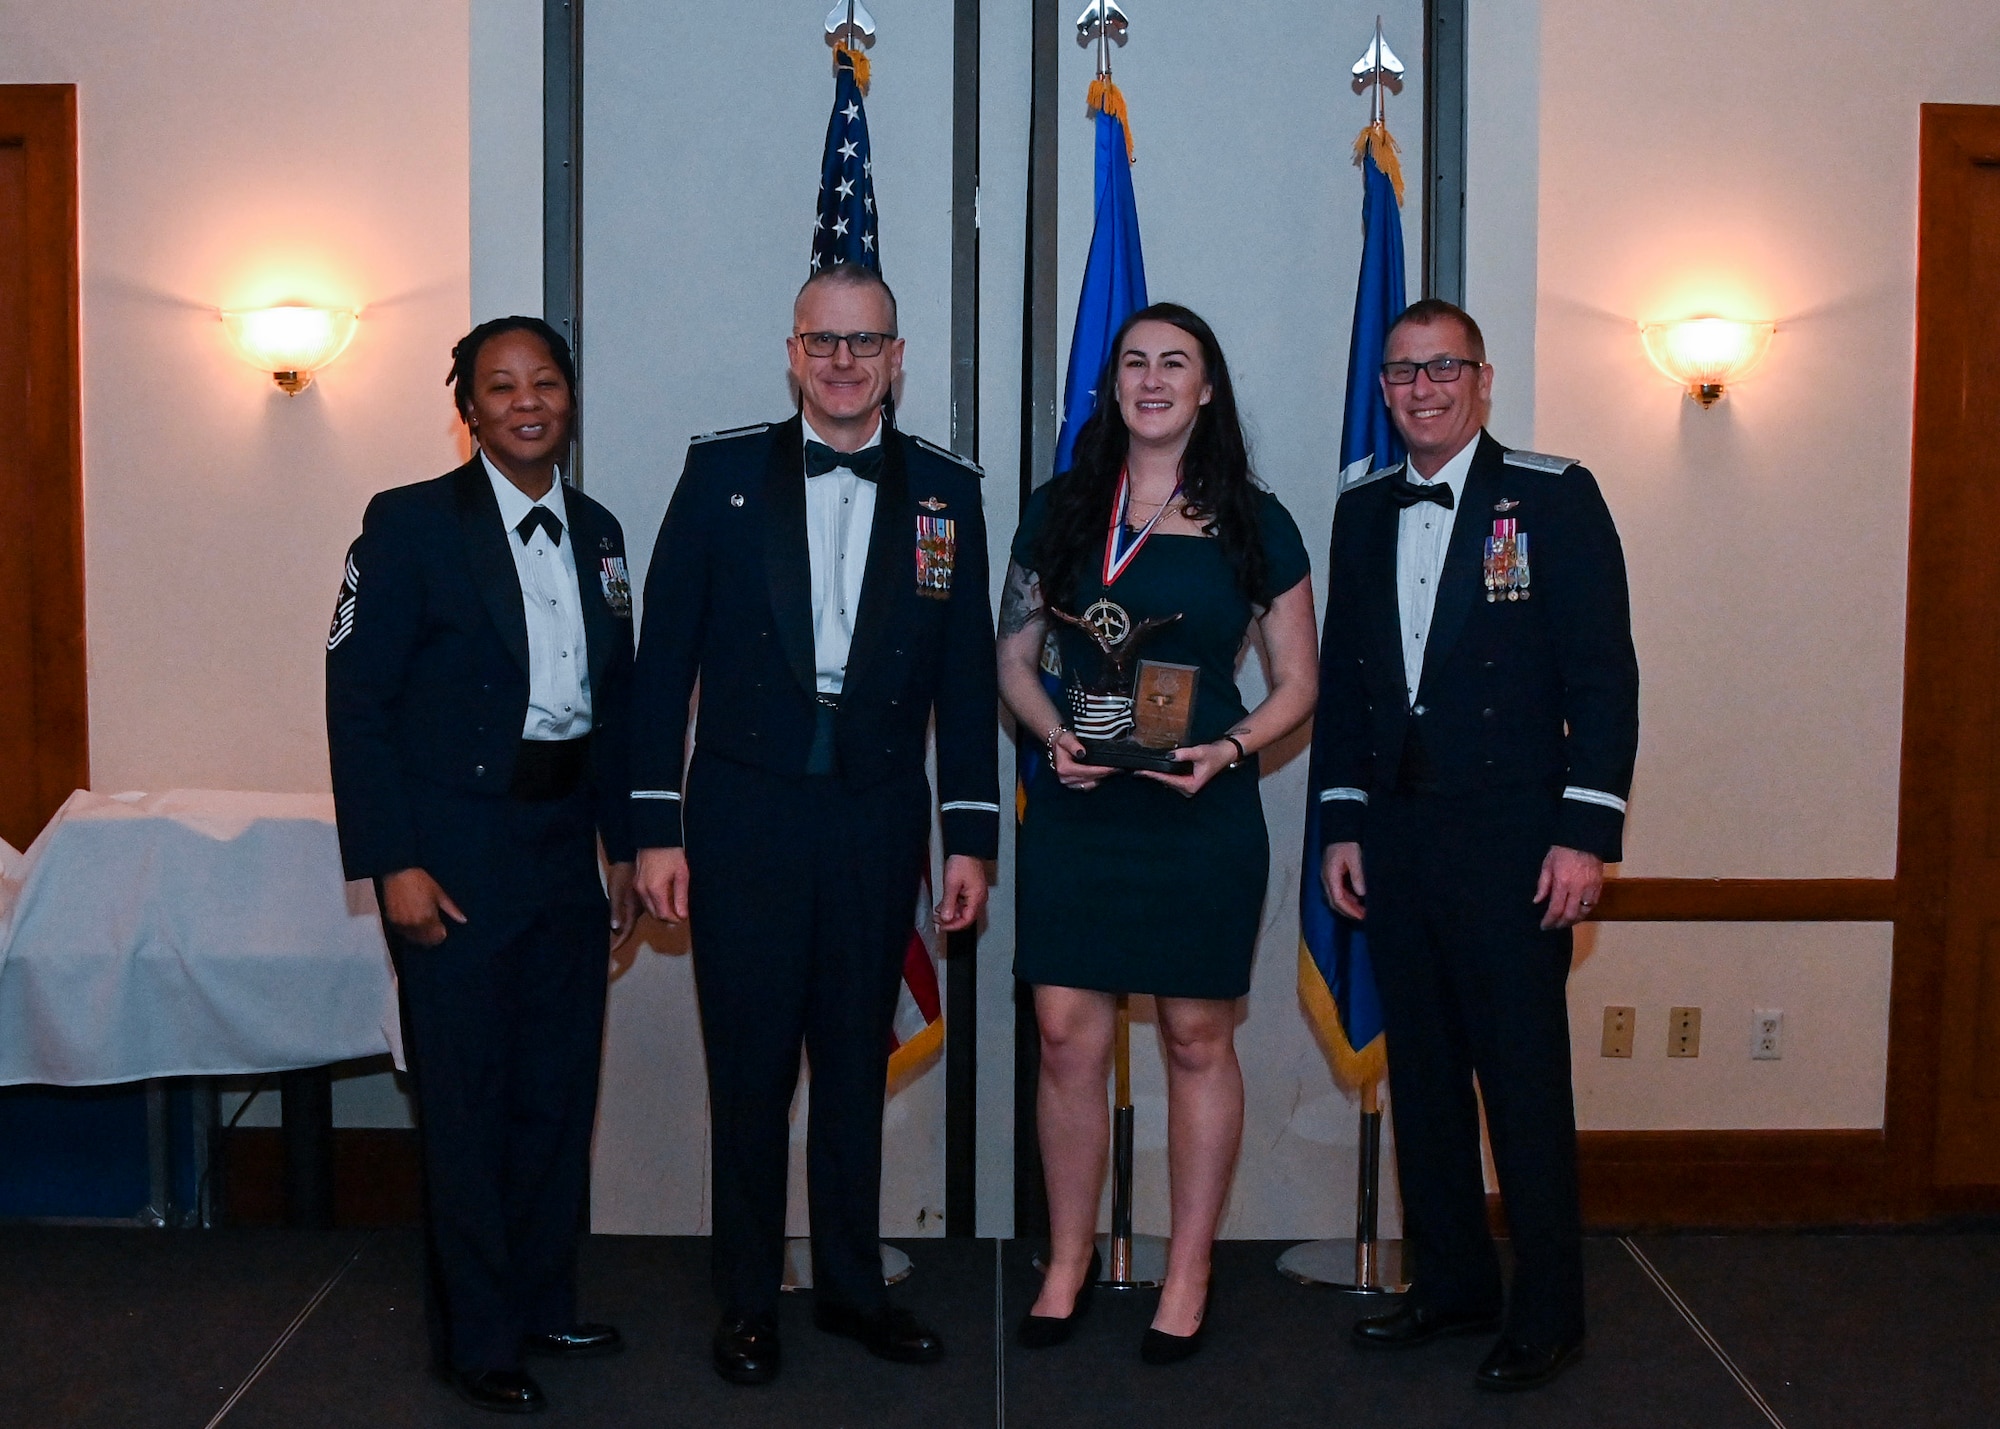 The 459th Air Refueling Wing announces the 2022 Annual Awards winners. The wing held its annual awards banquet to announce the winners on March 4, 2023, at The Club at Andrews.